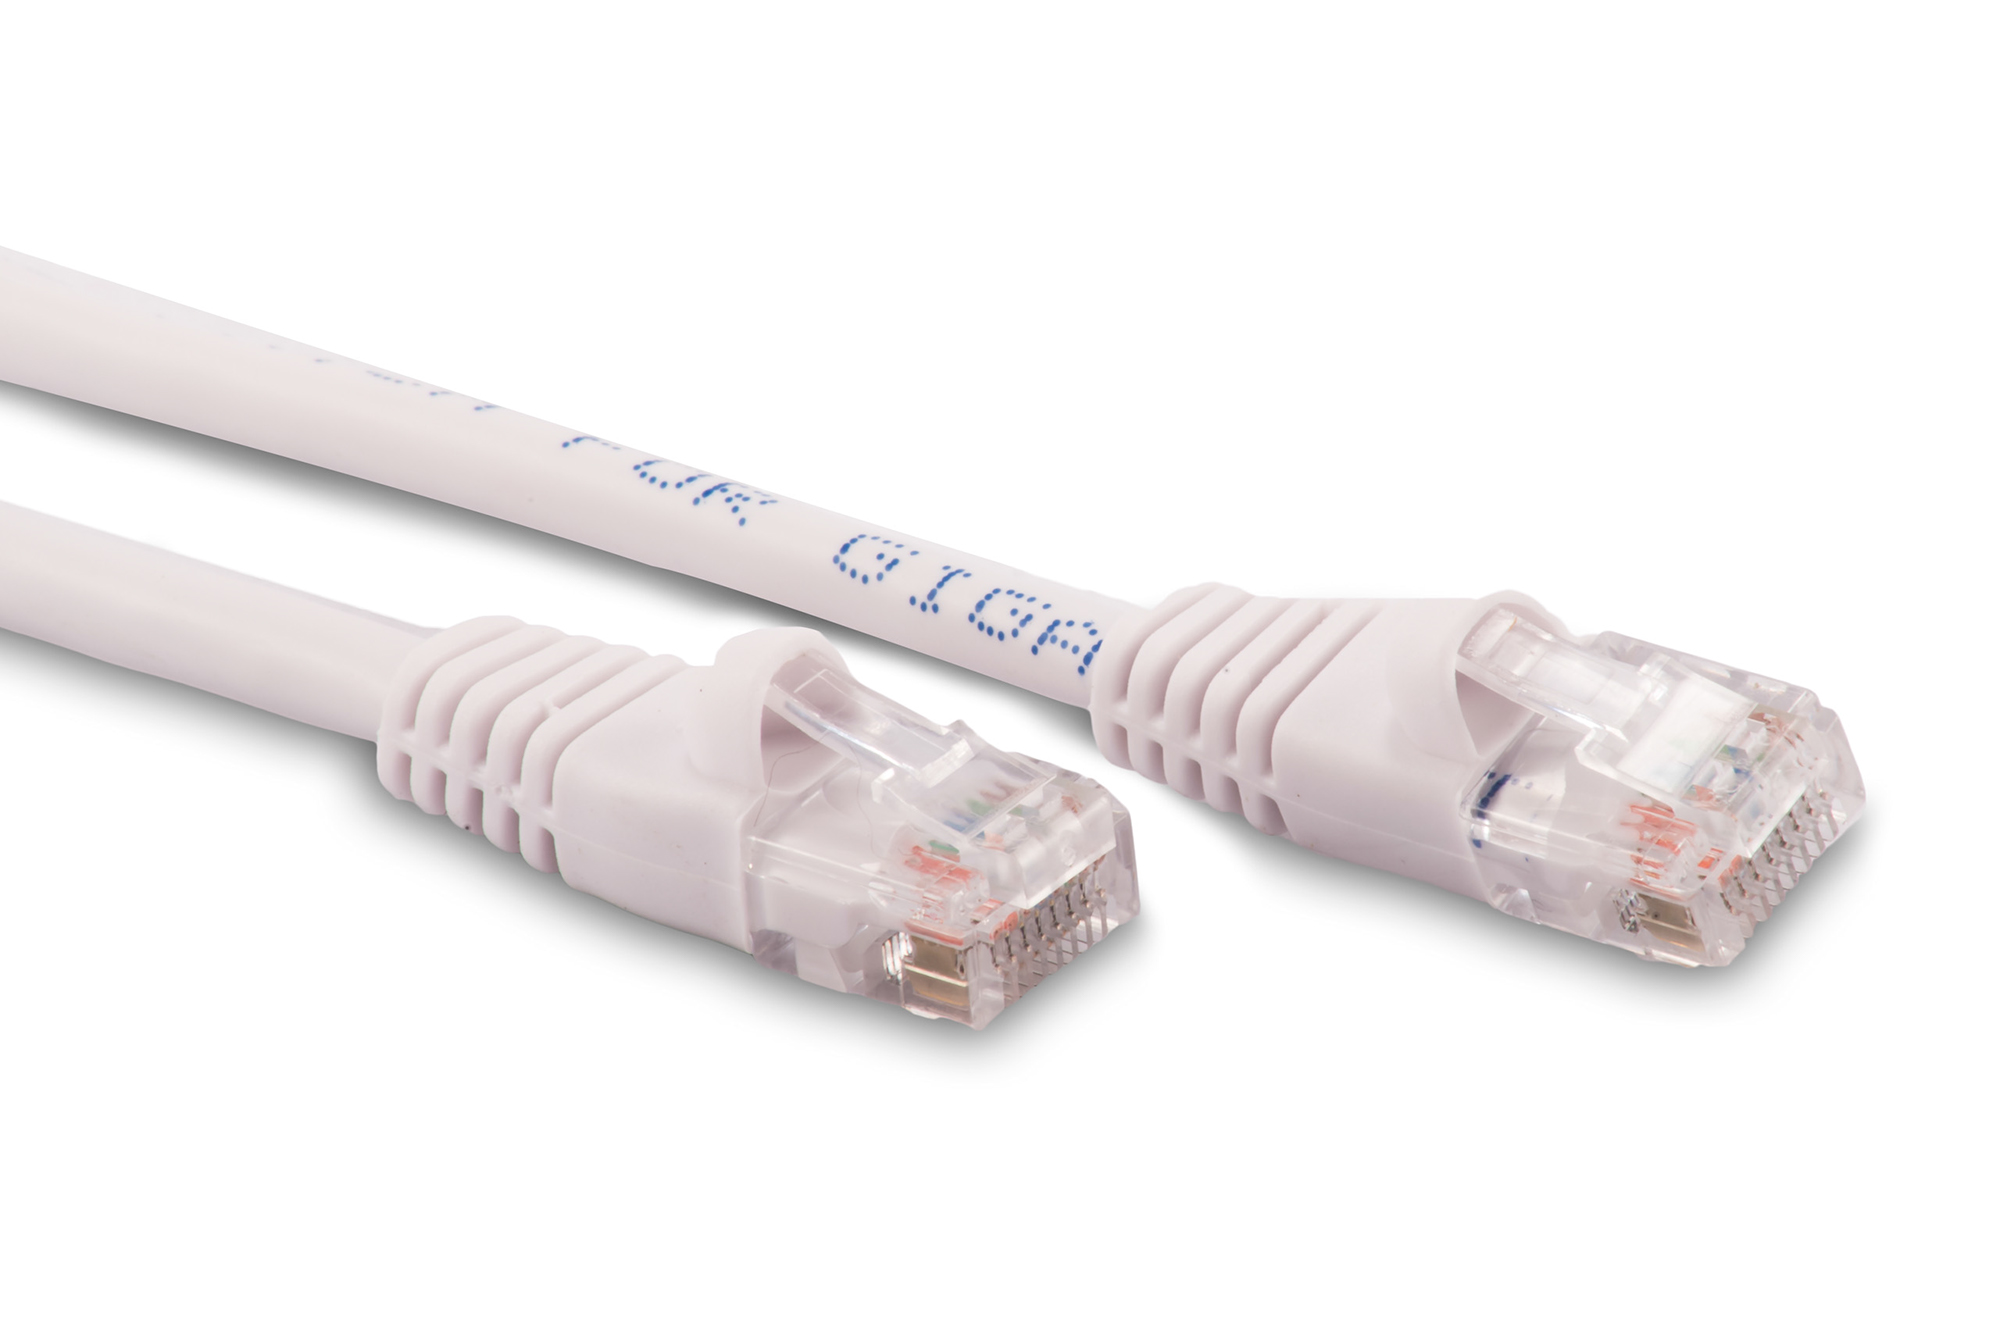 8ft Cat6 Ethernet Patch Cable - White Color - Snagless Boot